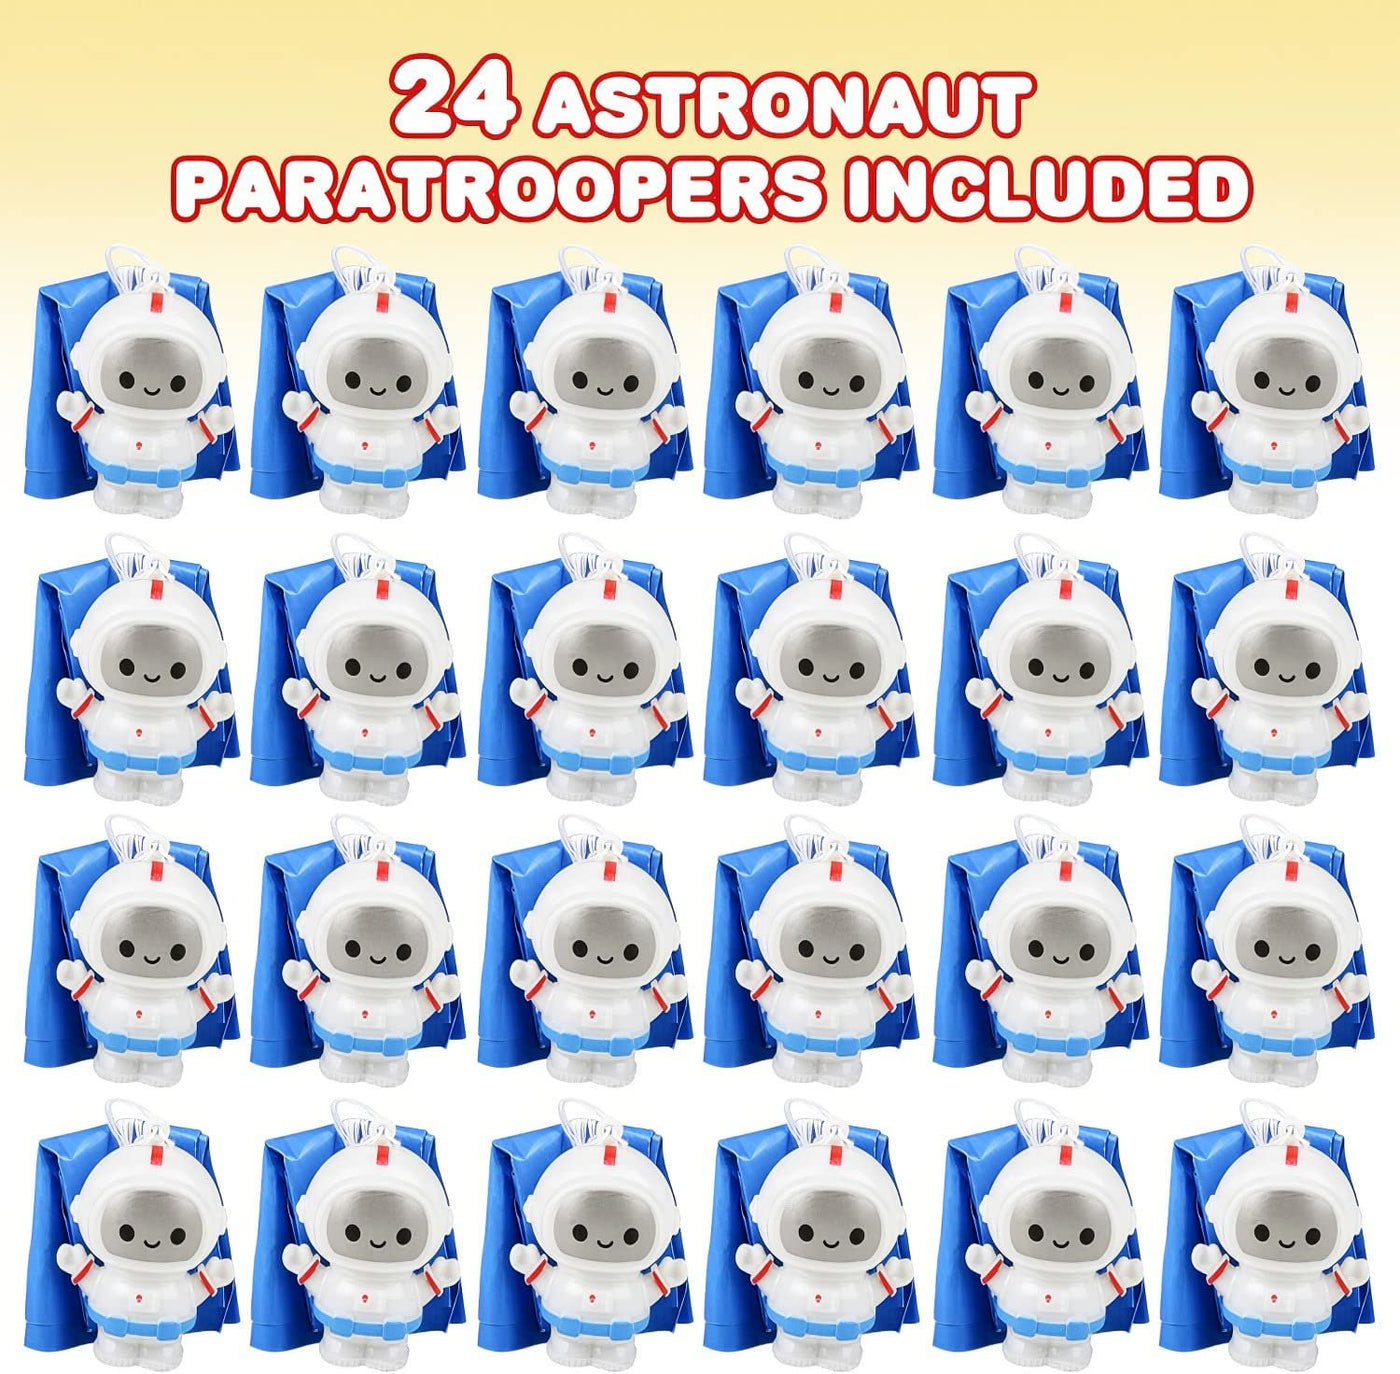 Mini Astronaut Paratroopers with Parachutes, Bulk Pack of 24, Durable Plastic Parachute Toys Playset, Fun Parachute Party Favors, Goodie Bag Fillers for Boys and Girls